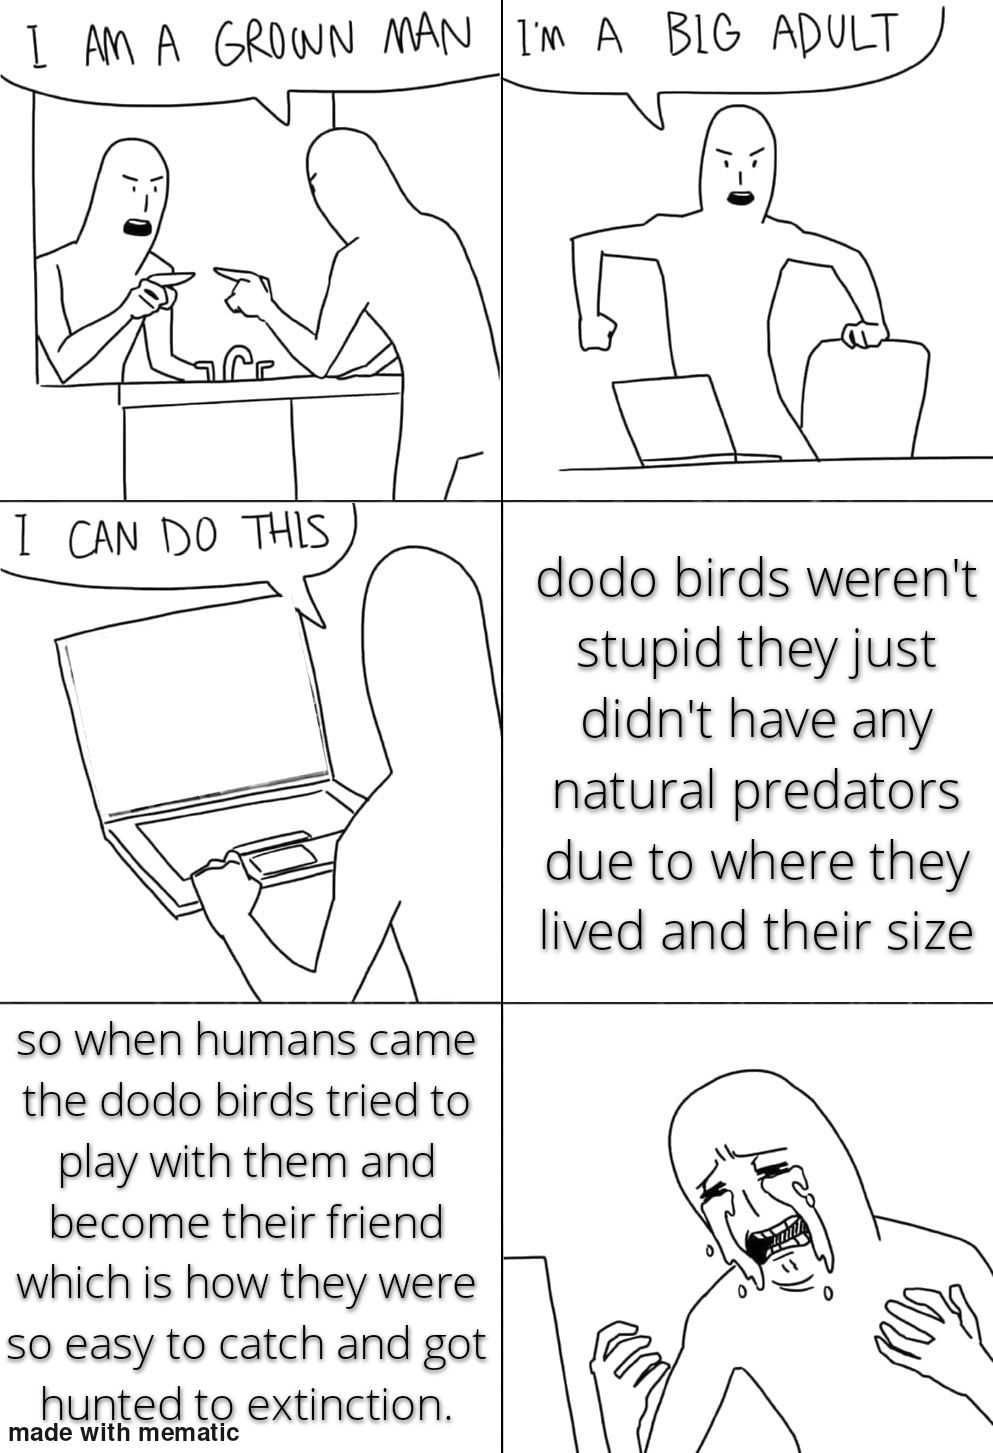 I've heard this sub is a fan of the great emu wars, but have you heard of the dodo genocide?